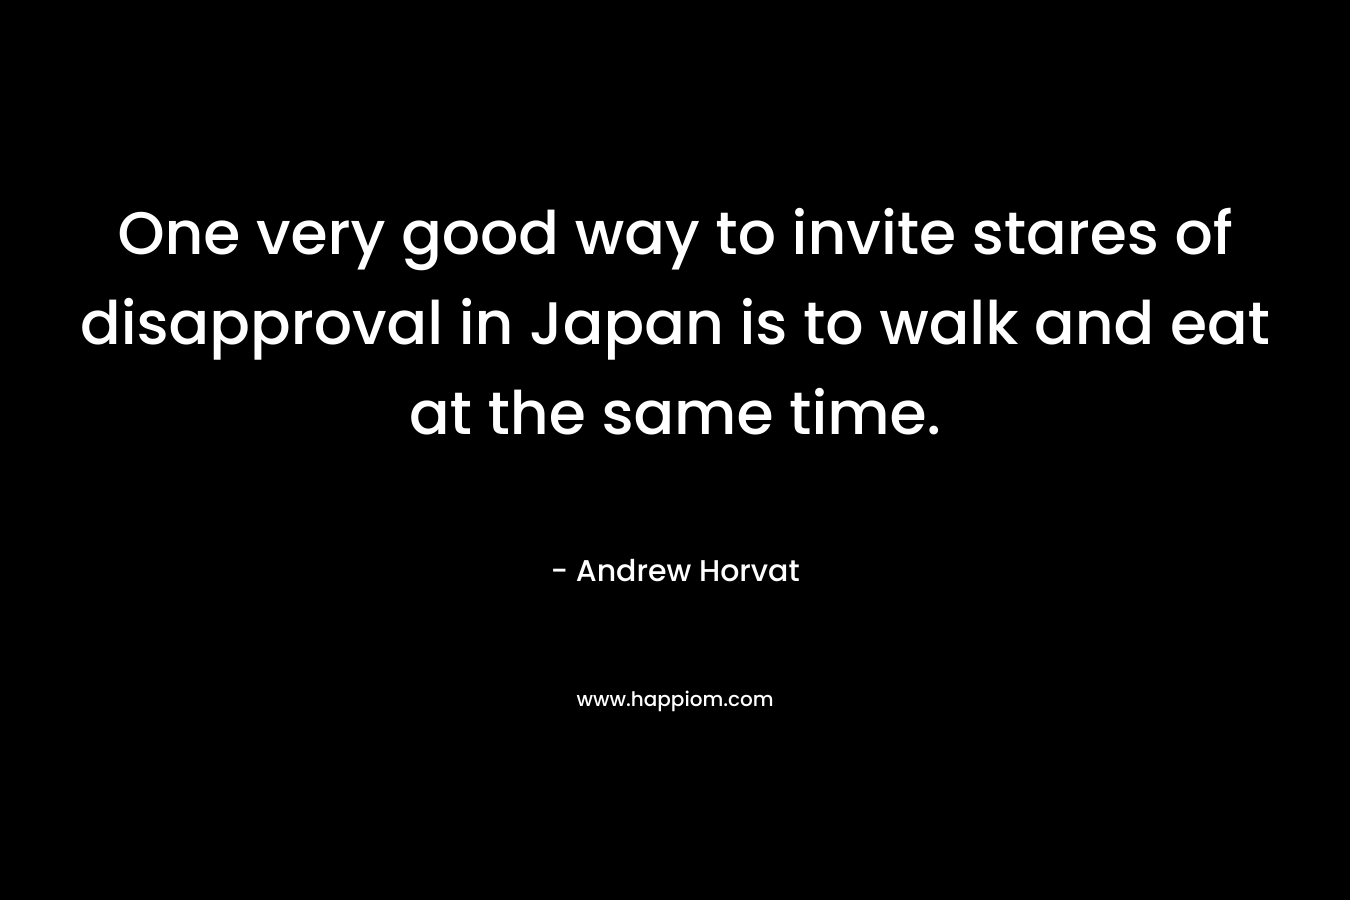 One very good way to invite stares of disapproval in Japan is to walk and eat at the same time. – Andrew Horvat